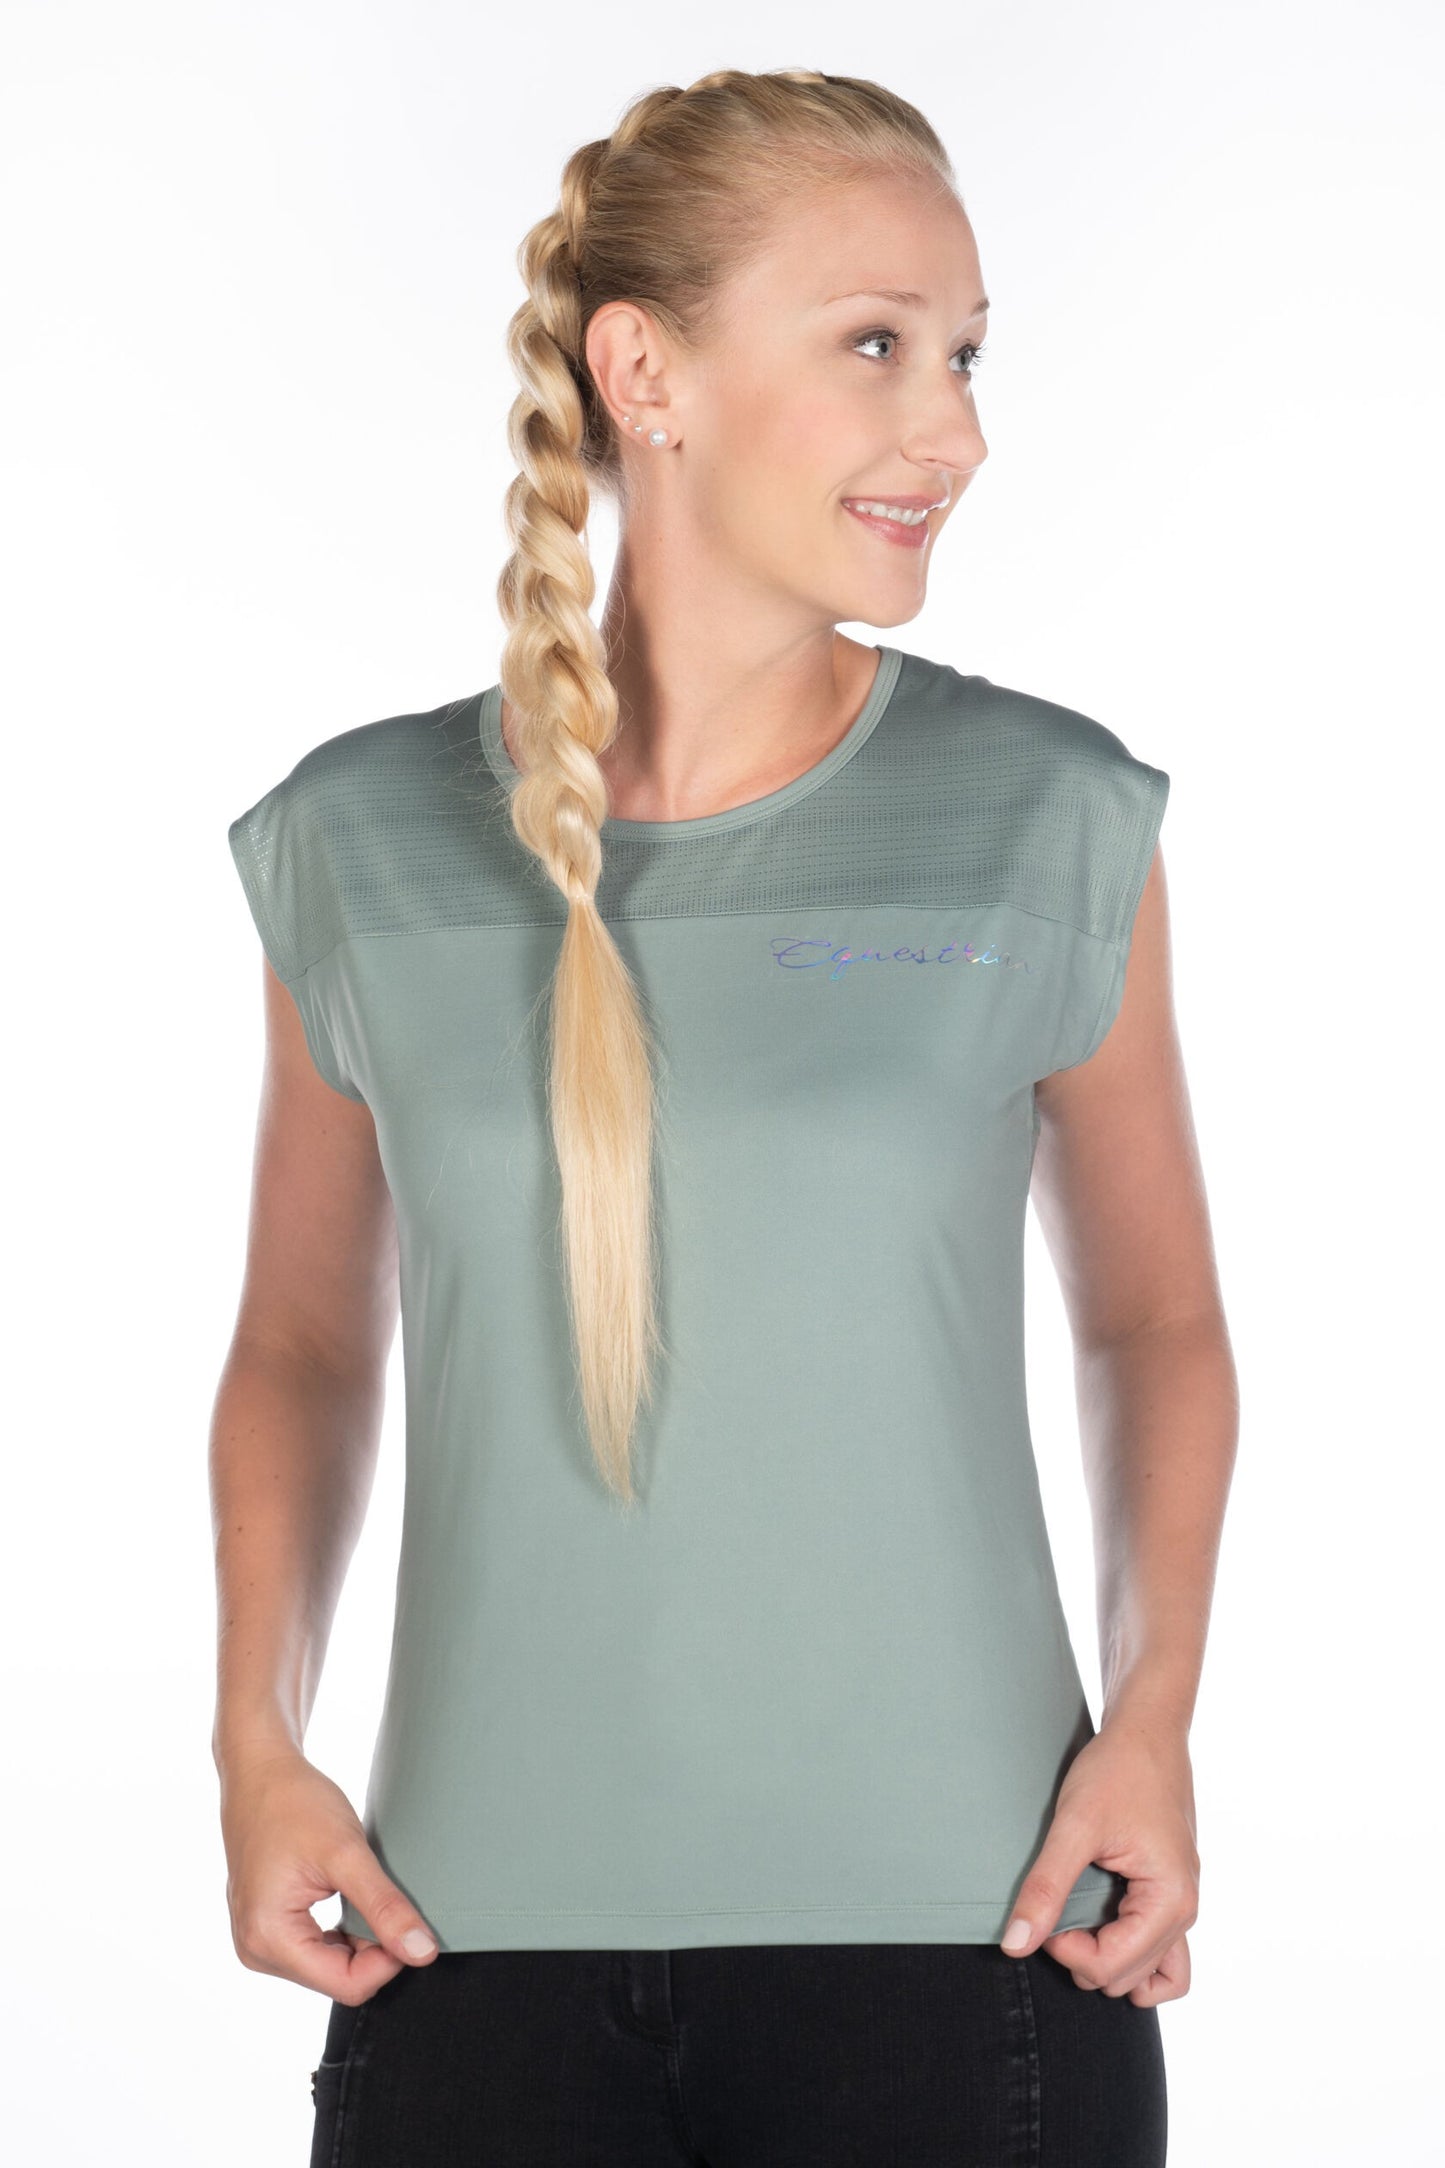 Harbour Island T-Shirt in Sage